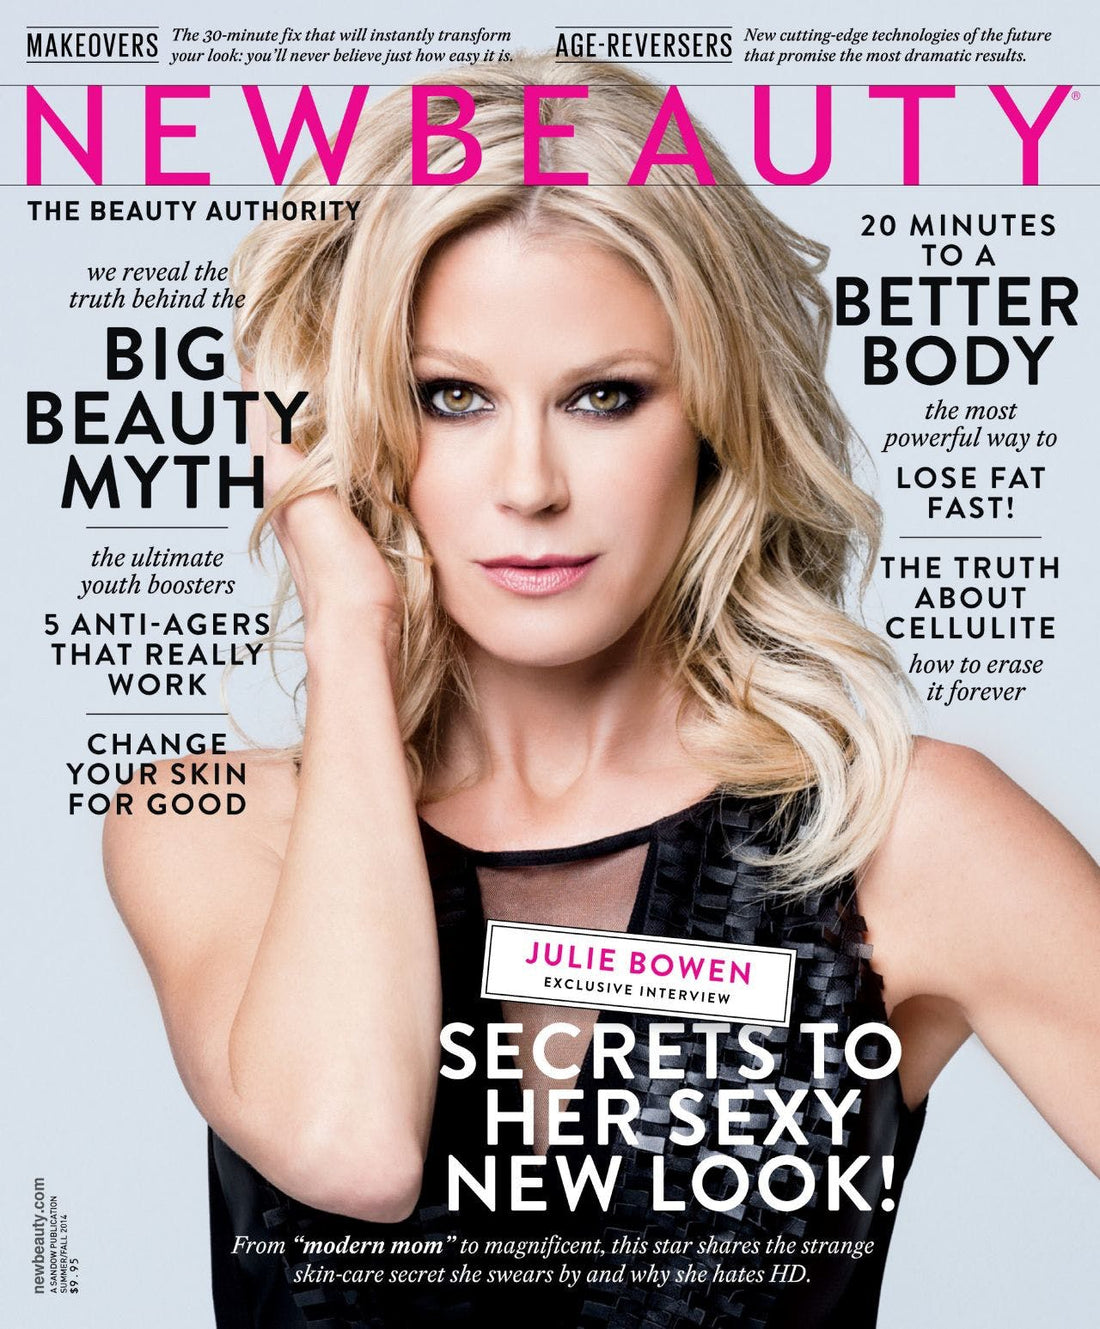 New Beauty Magazine featuring the PMD Personal Microderm